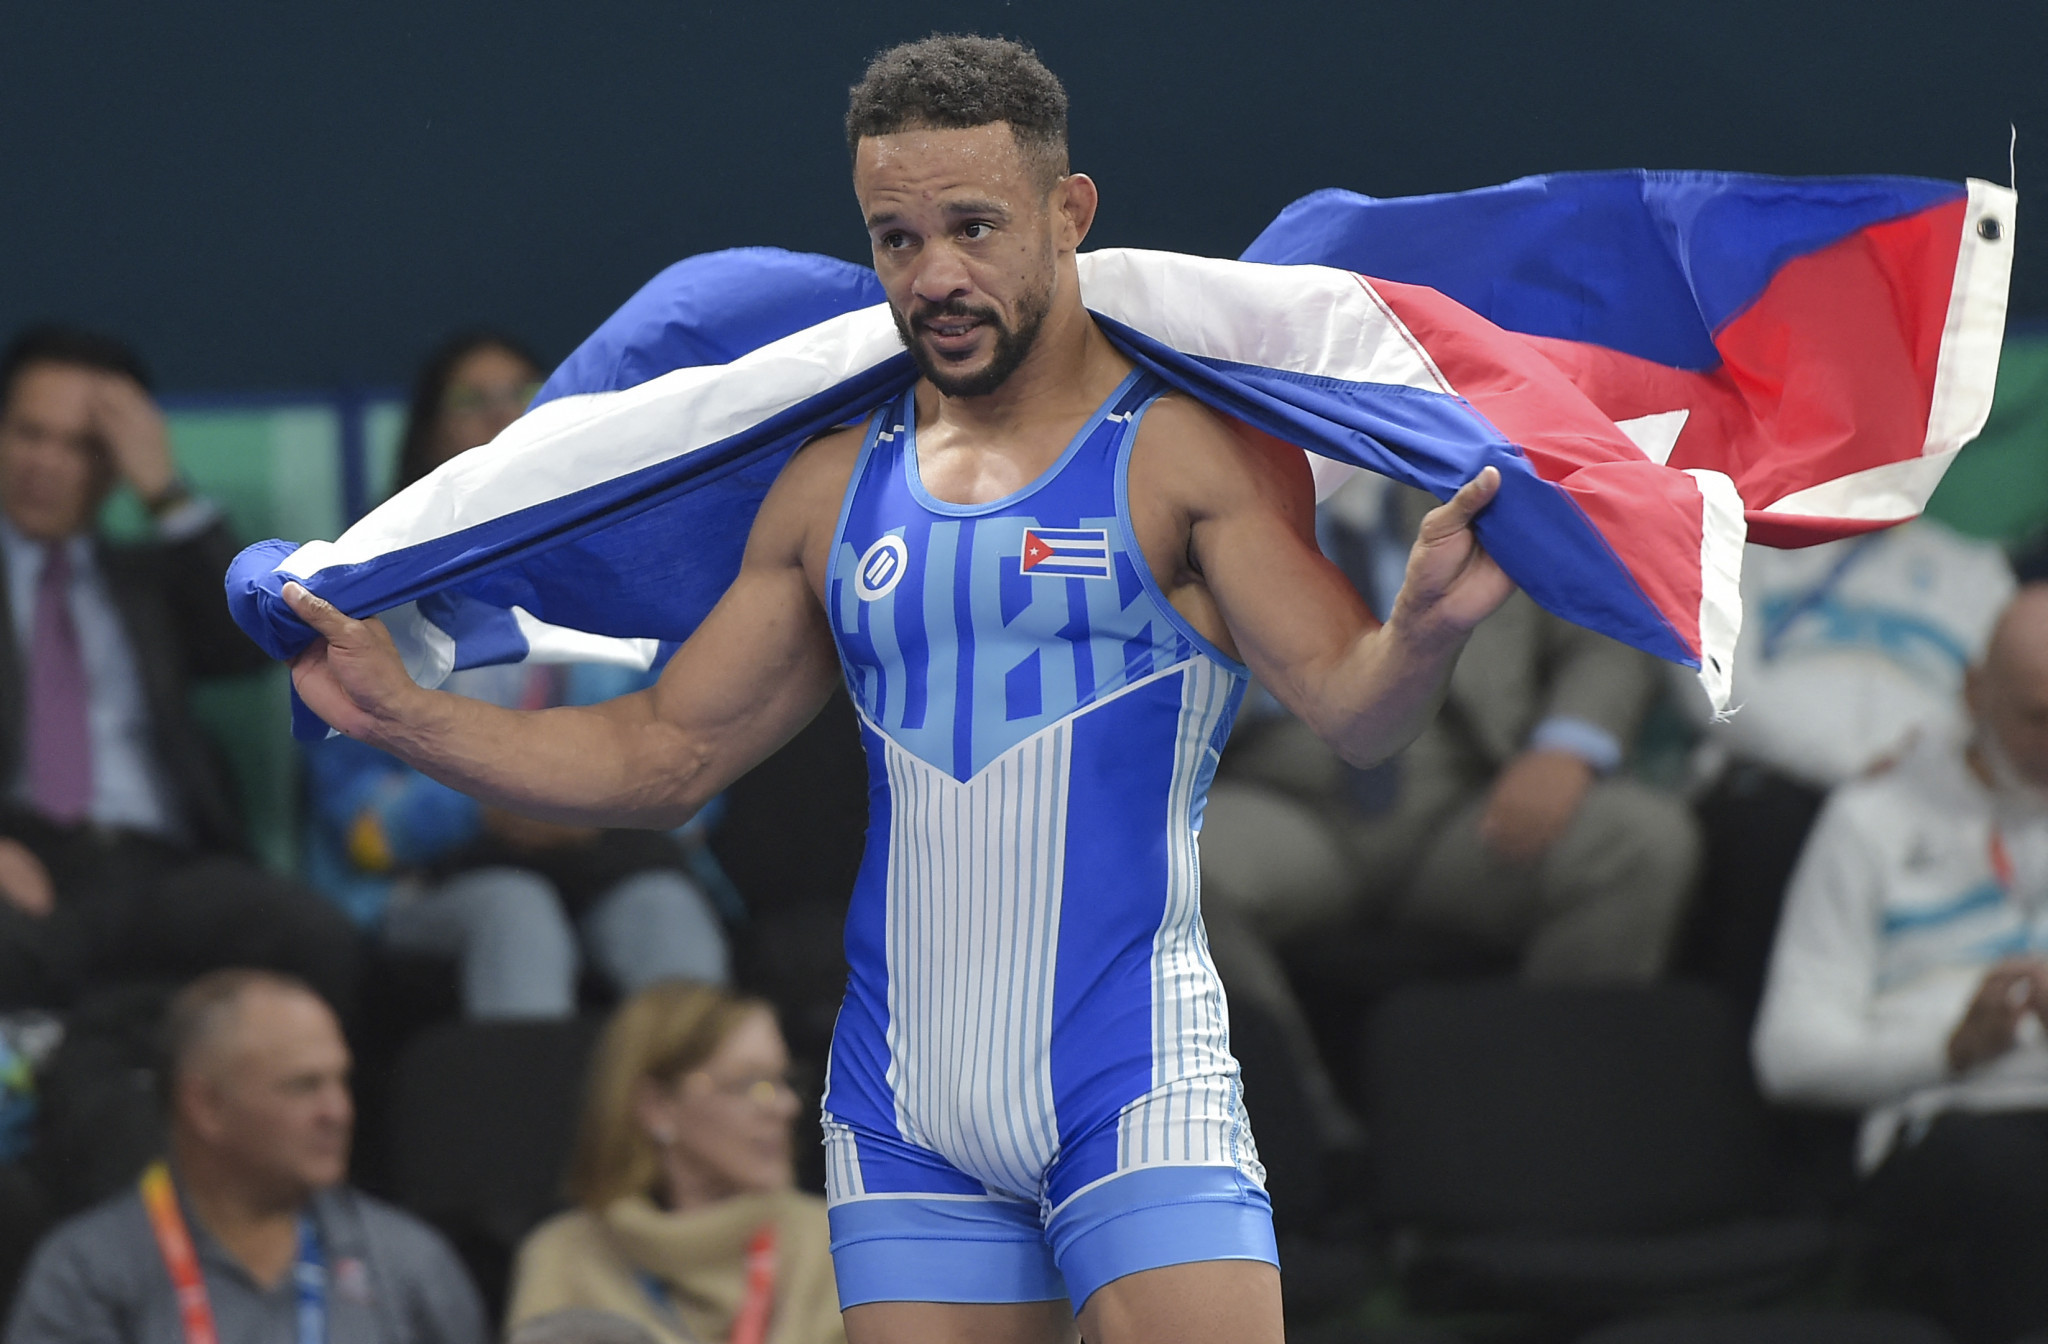 Cuba's Alejandro Valdes celebrates his victory at the 2023 Pan American Games in Santiago. GETTY IMAGES